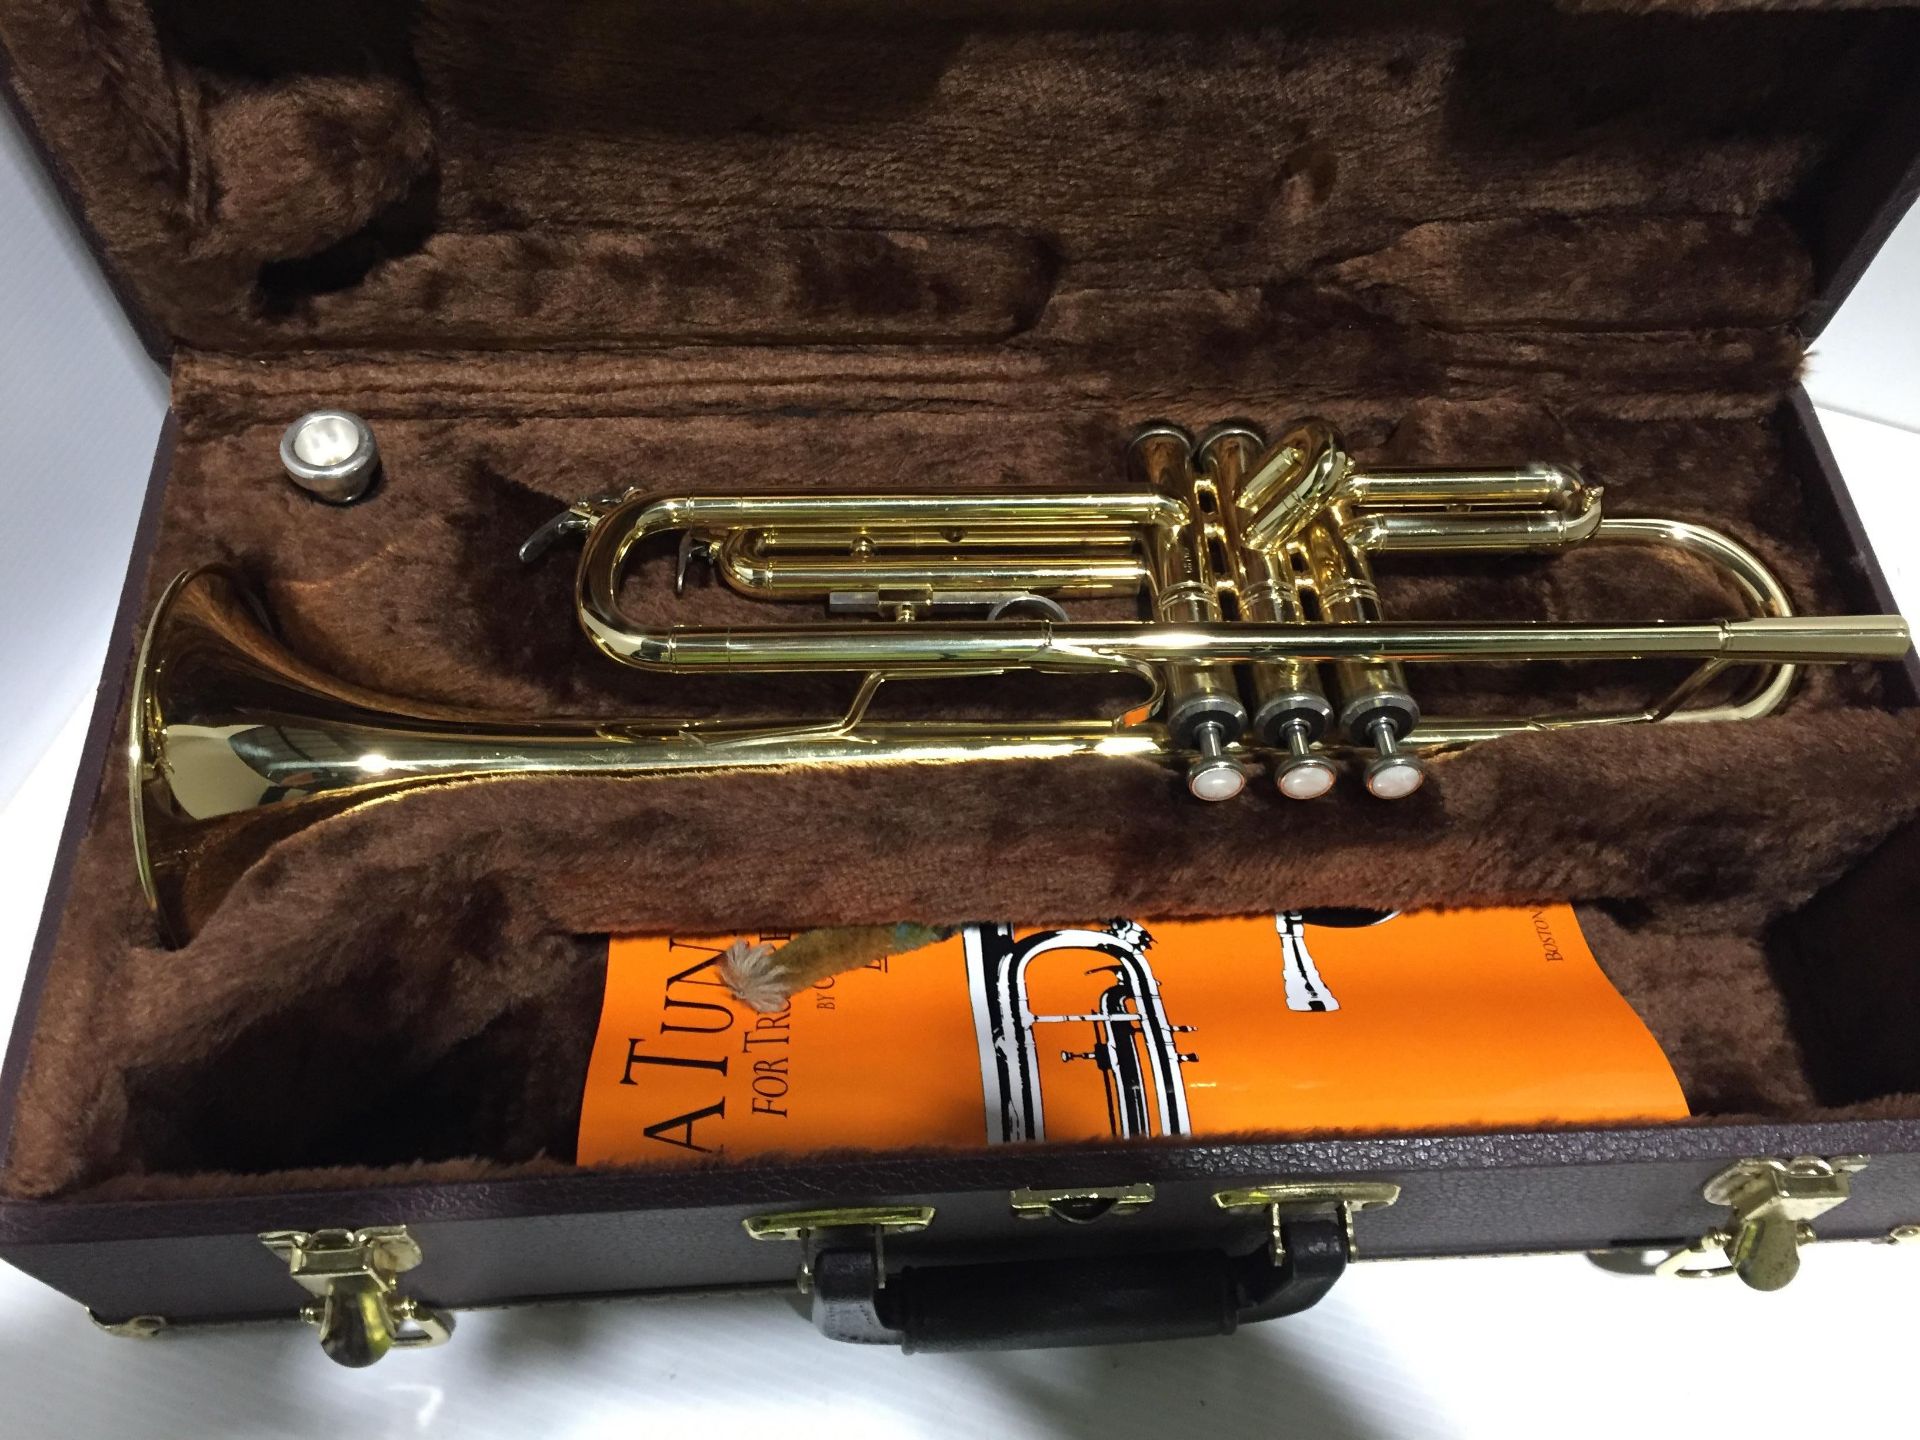 Elkhart Series 2 Trumpet in brown carrying case with cleaning brush and book 1 - A Tune A Day - Image 2 of 2